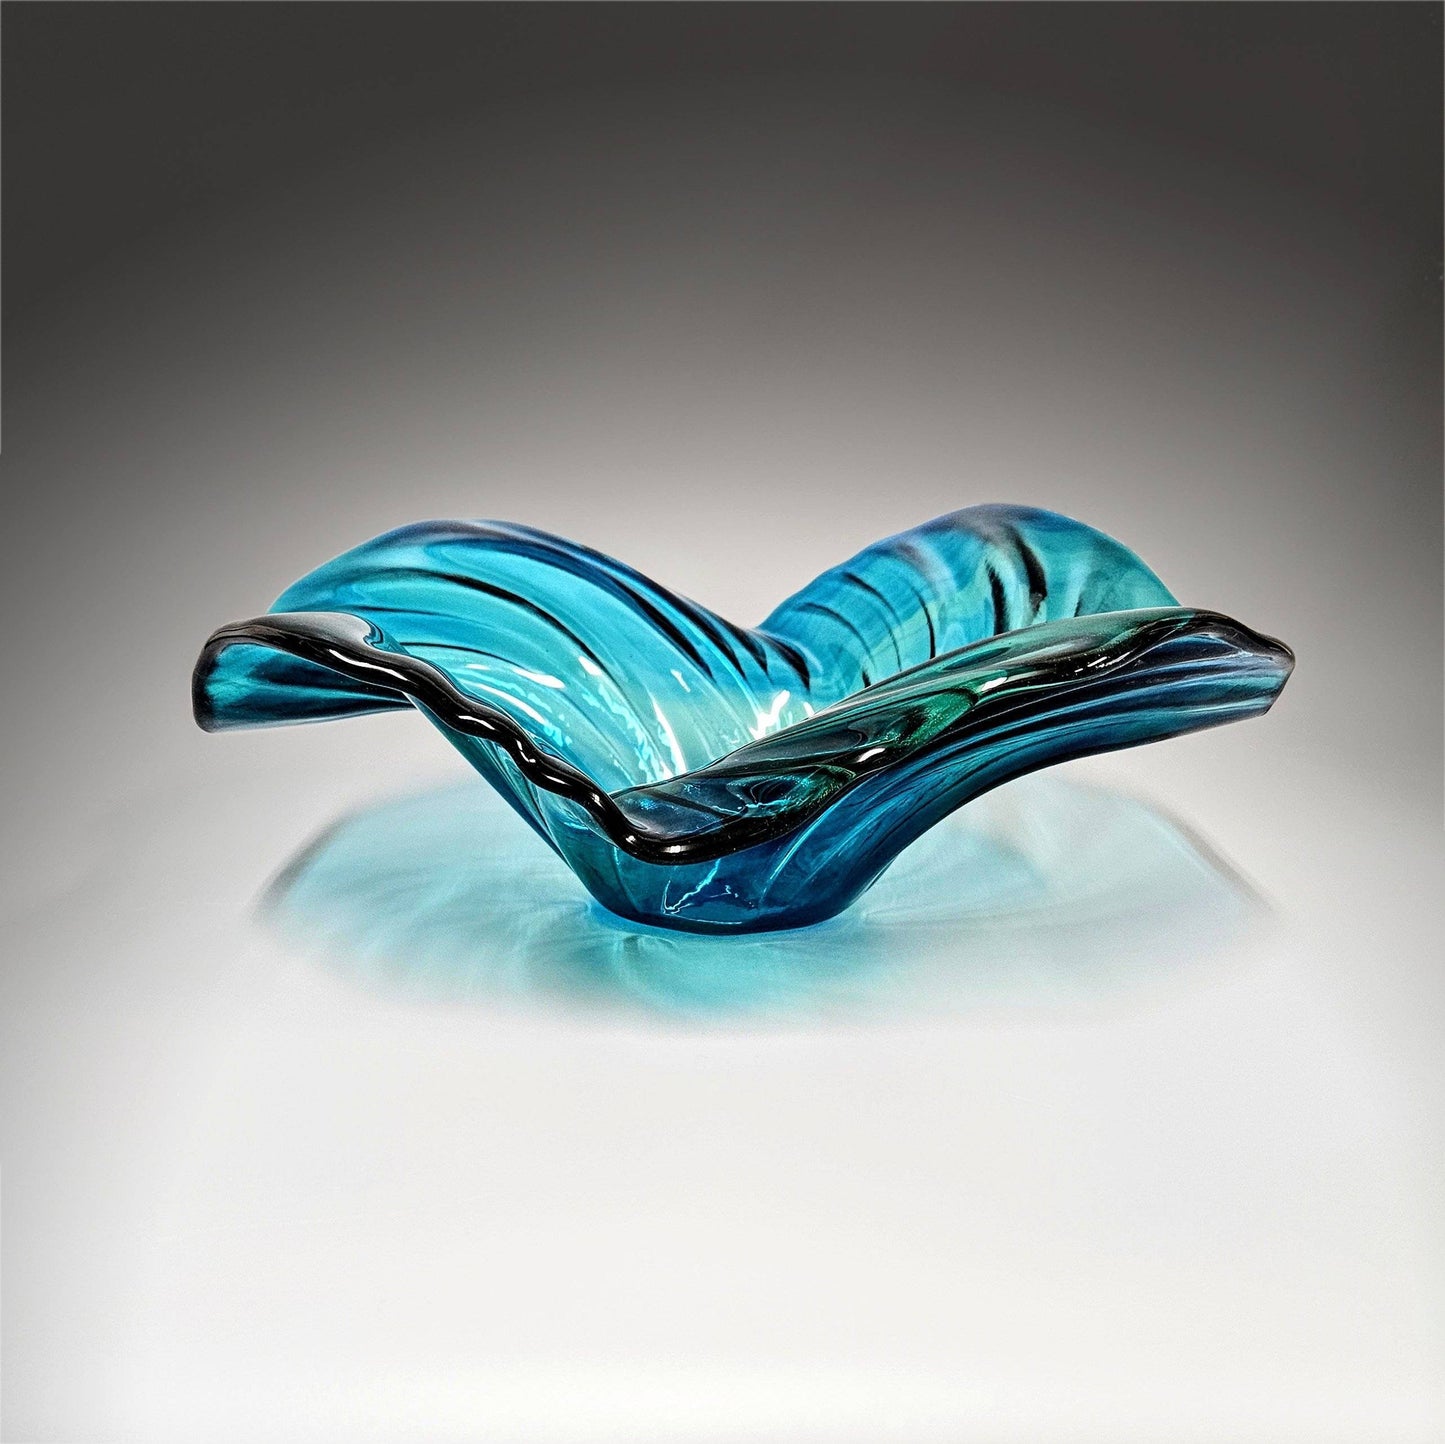 Oblong Wave Bowl in Teal Aqua Turquoise | Unique Glass Art Gift Ideas